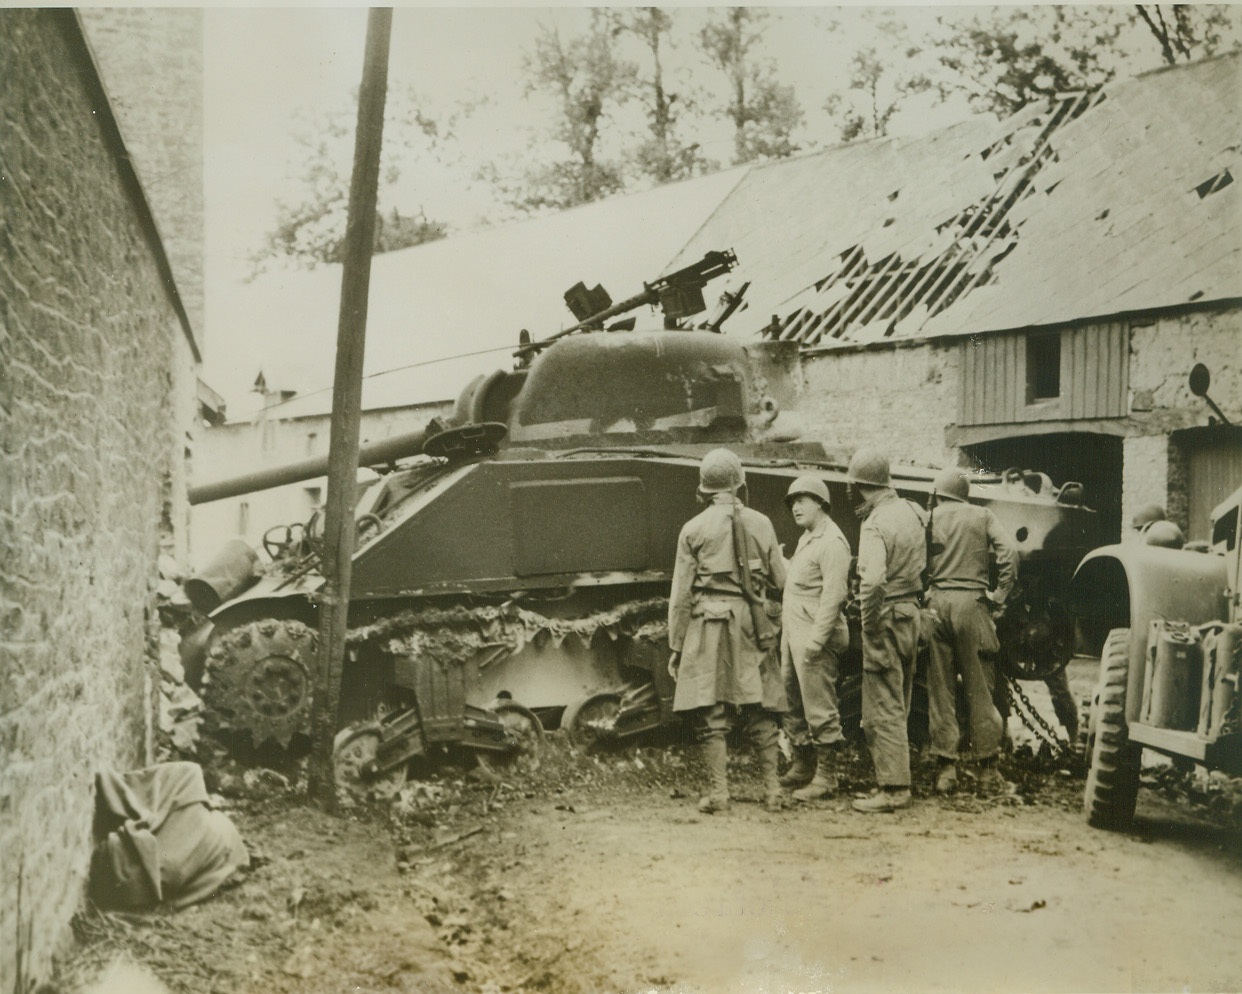 Allies Finally Get Foothold on La Haye, 7/9/1944. La Haye Du Puits, France—American soldiers look over one of their medium tanks, blocking a passage in La Haye Du Puits after it had been knocked out by German guns. The American forces, after being in and out of La Haye for five days, finally held it yesterday (July 8) against fierce German resistance. Although our forces have officially captured the city, German snipers continue to rain bullets into the streets.  Credit: ACME;